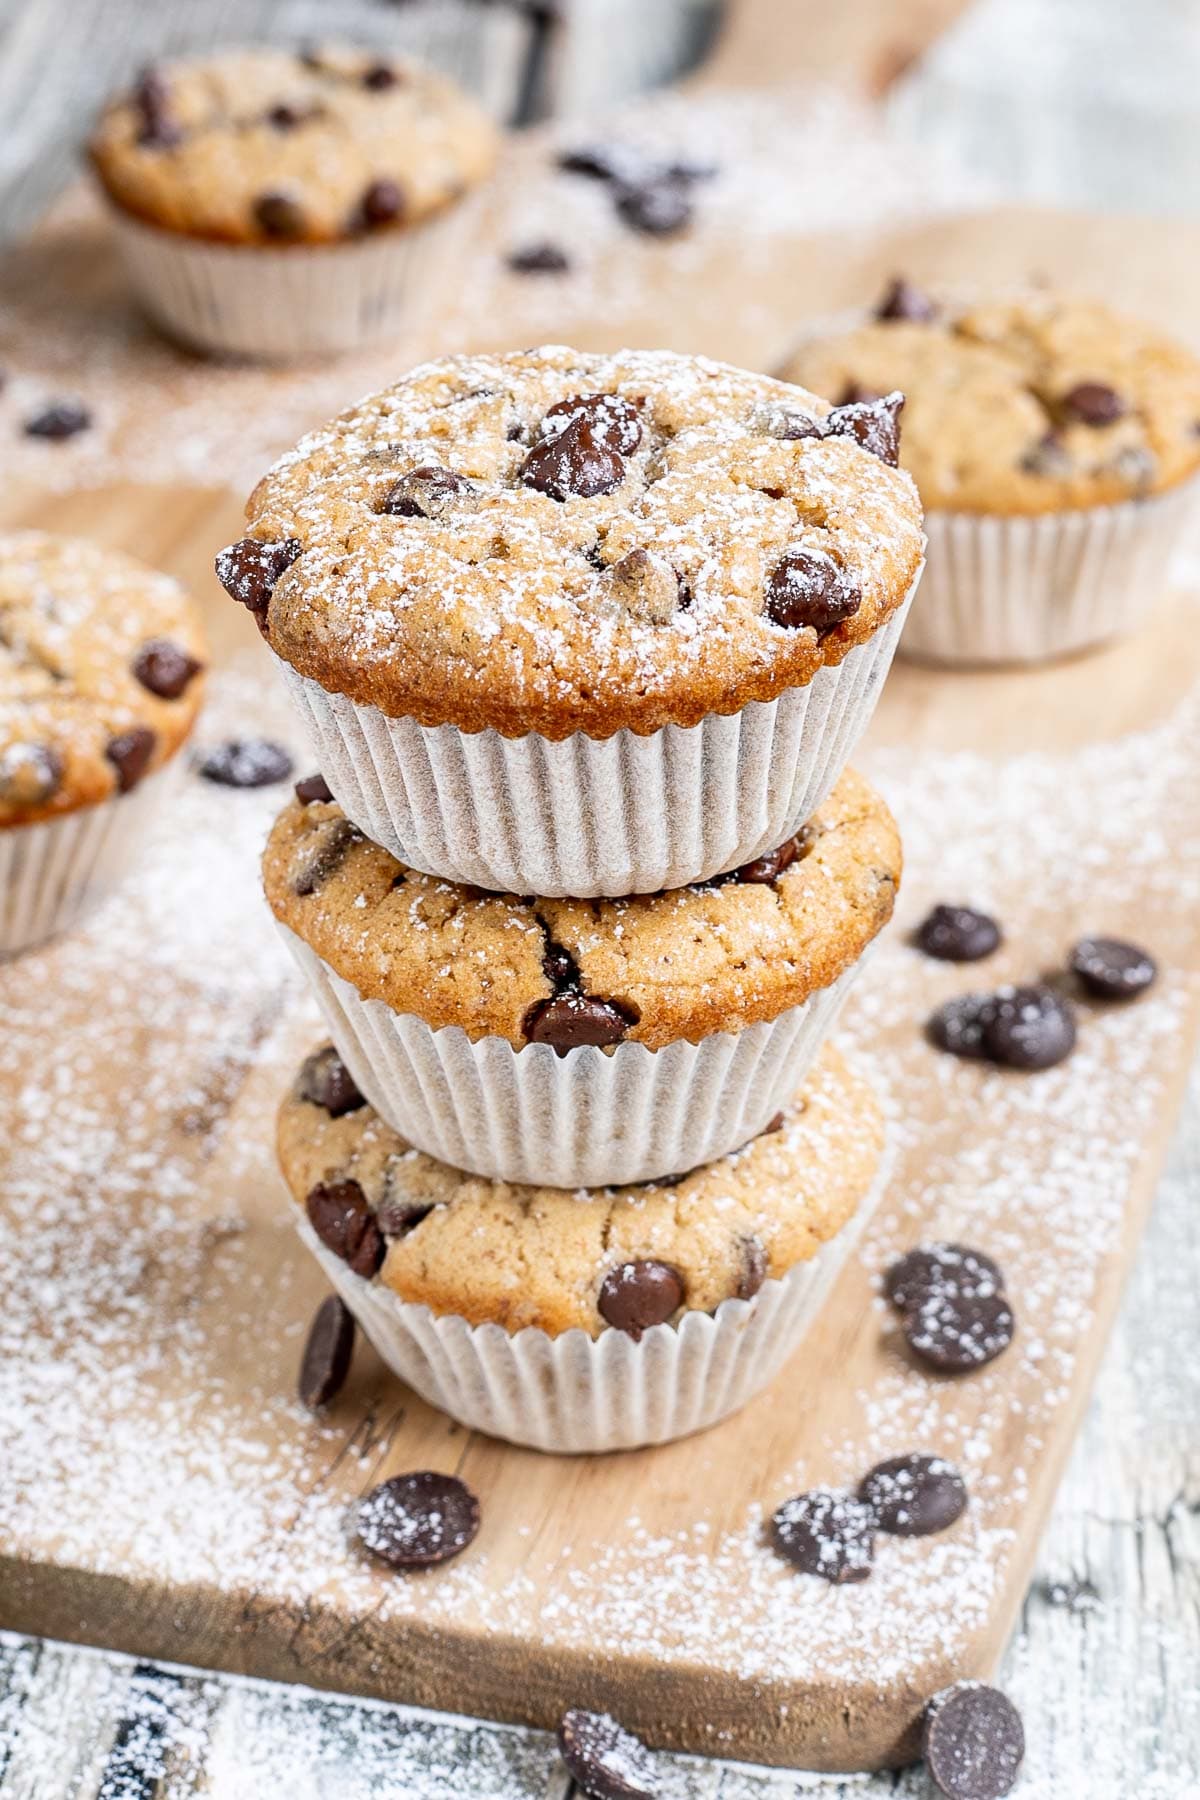 A stack of 3 chocolate chip muffins in paper liners surrounded by other muffins and more chocolate chips.